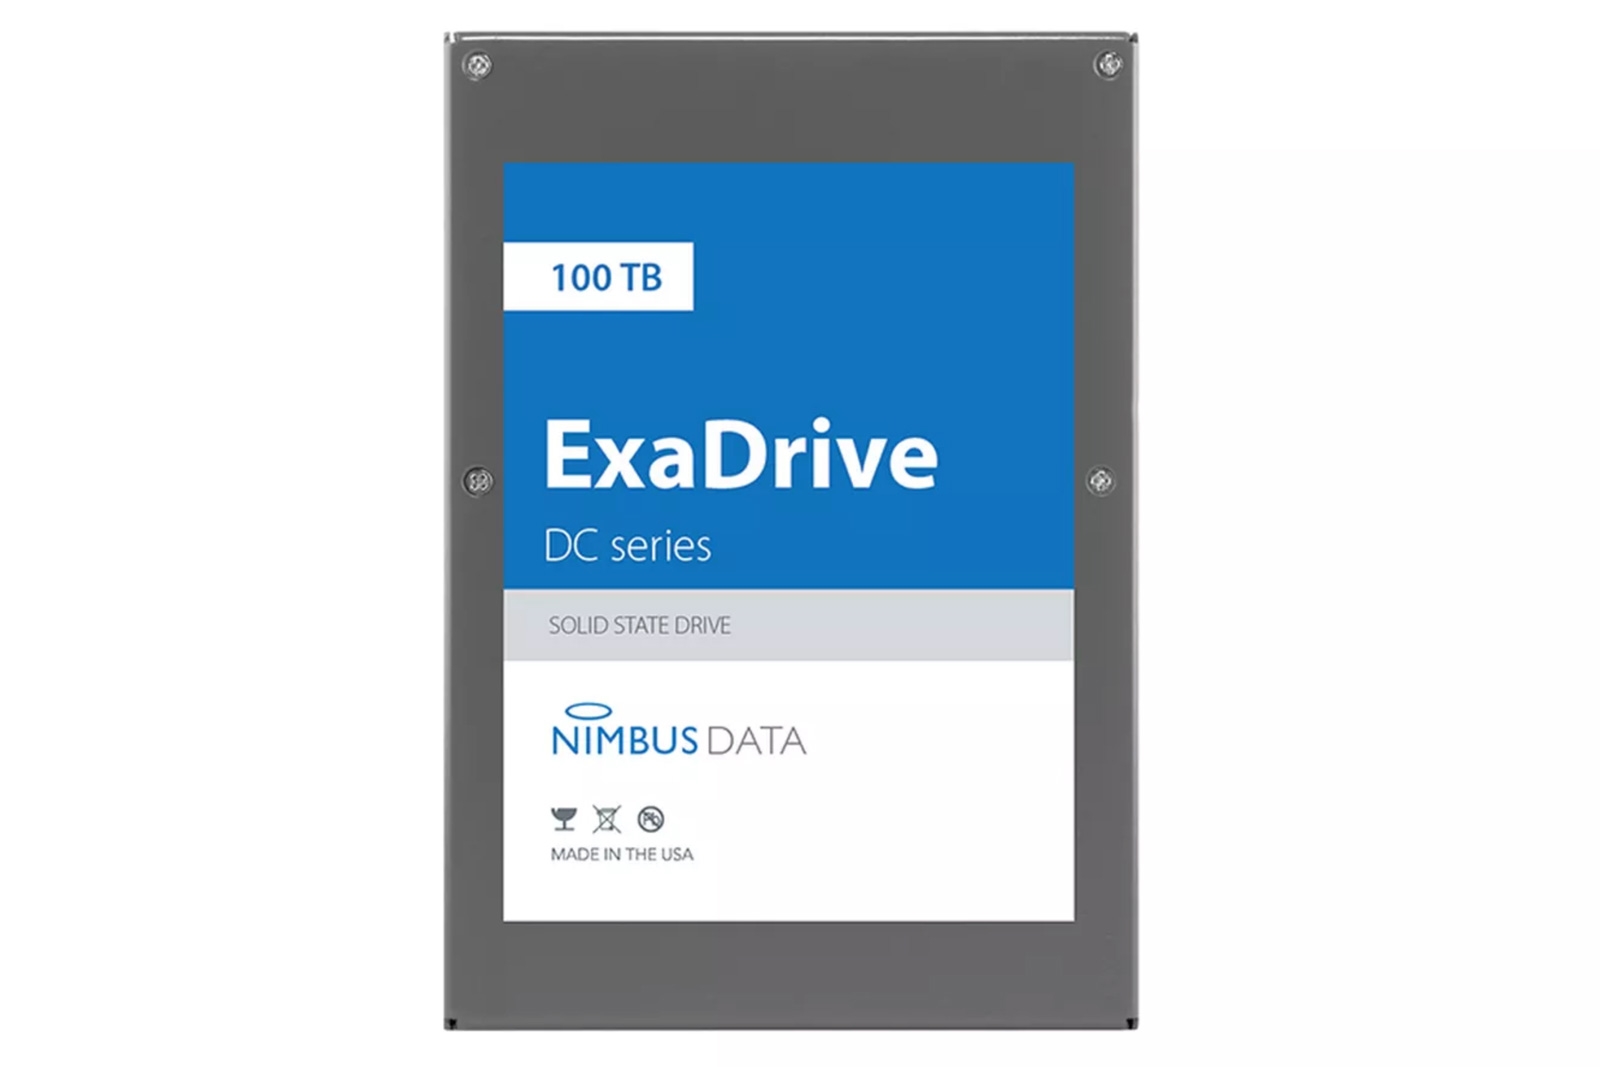 World's largest SSD capacity now stands at 100TB | DeviceDaily.com